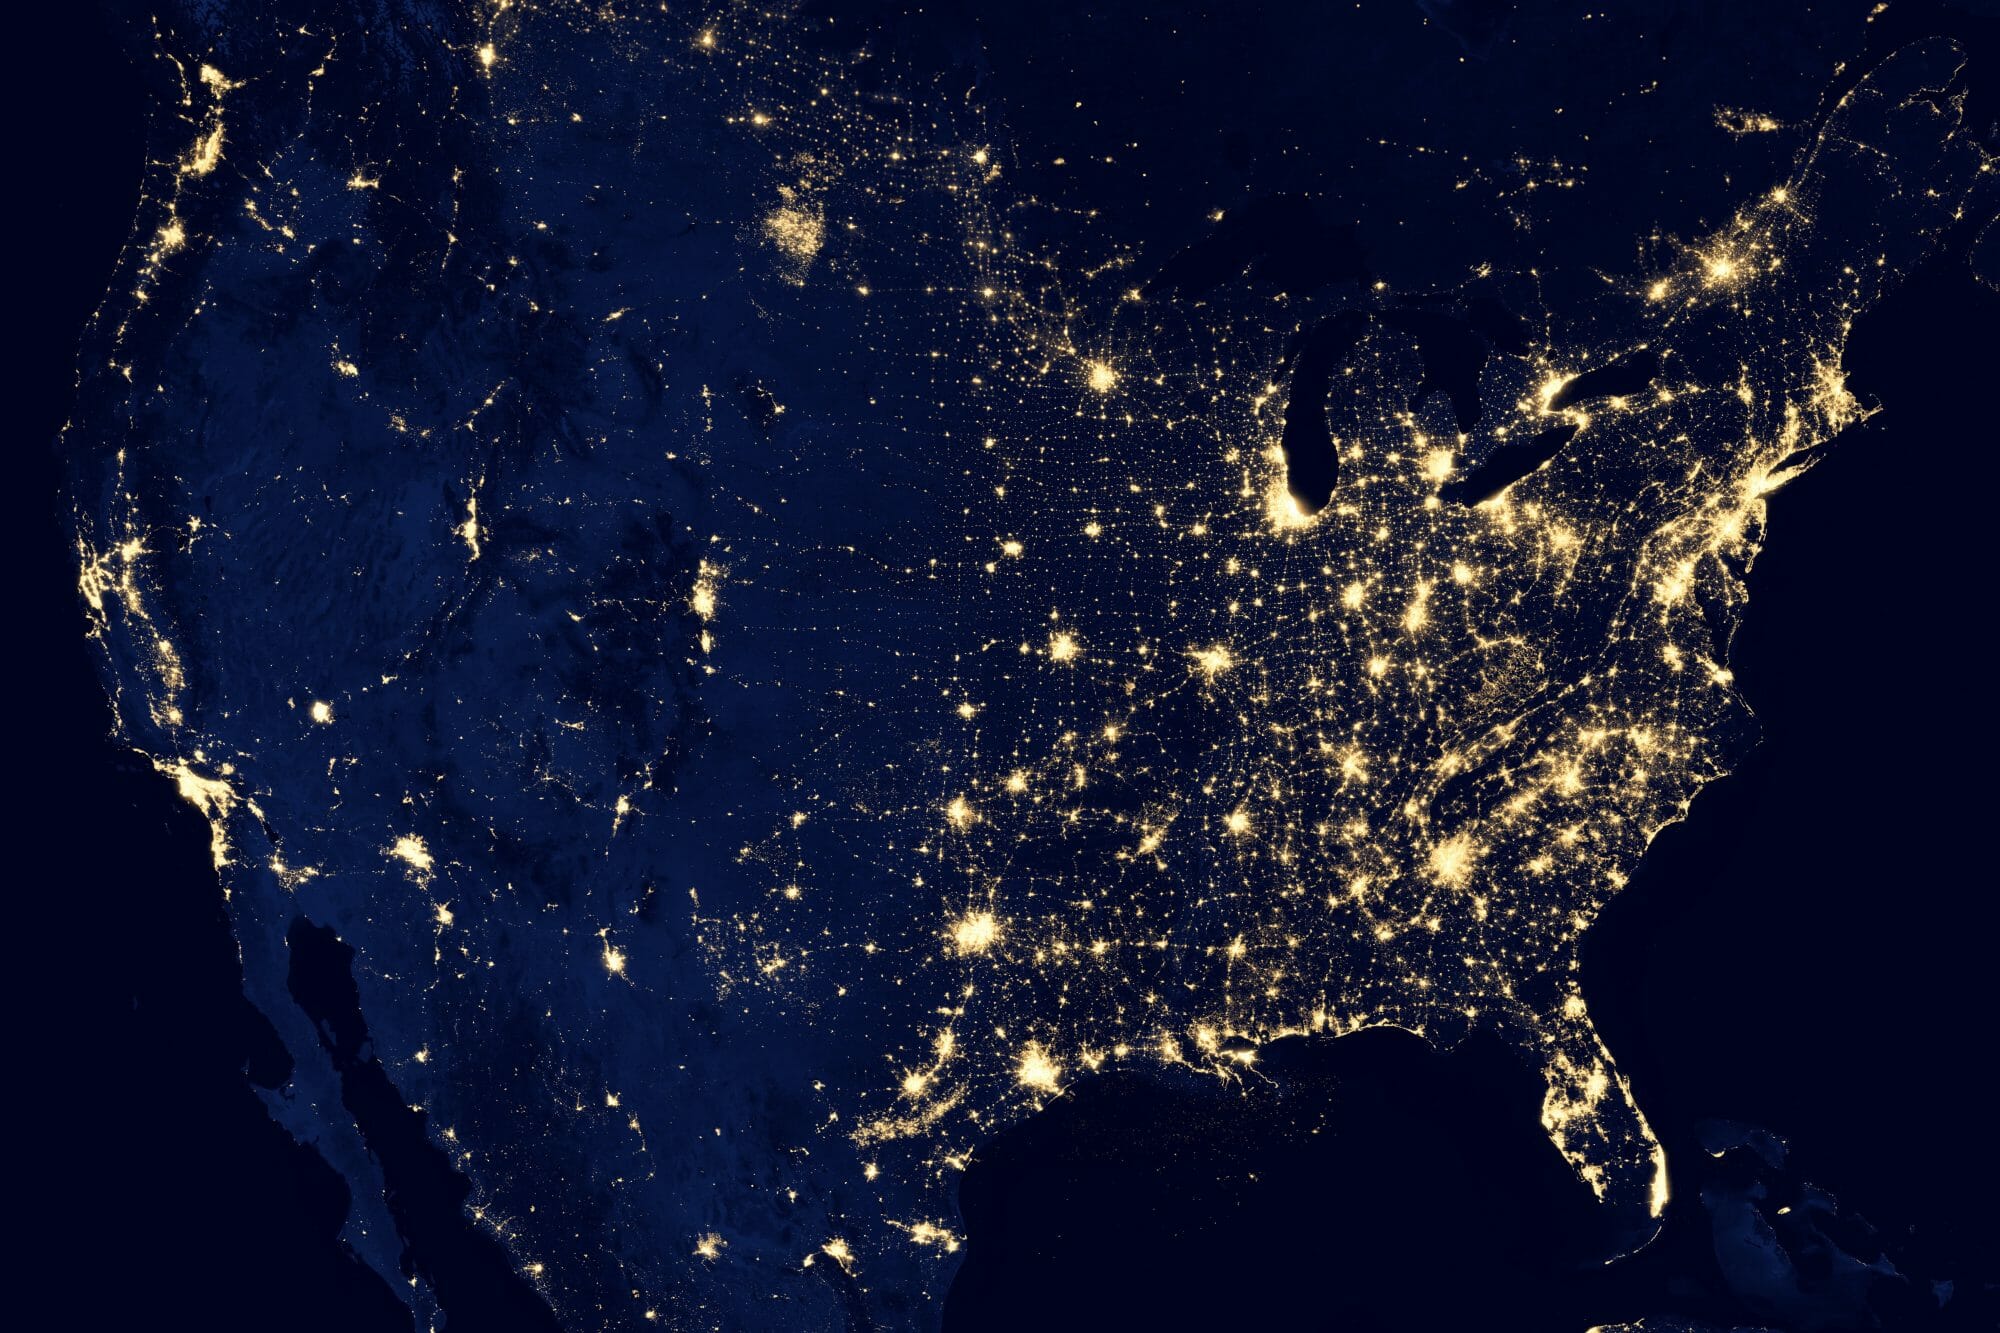 Satellite view of the USA at night showing clusters of city lights